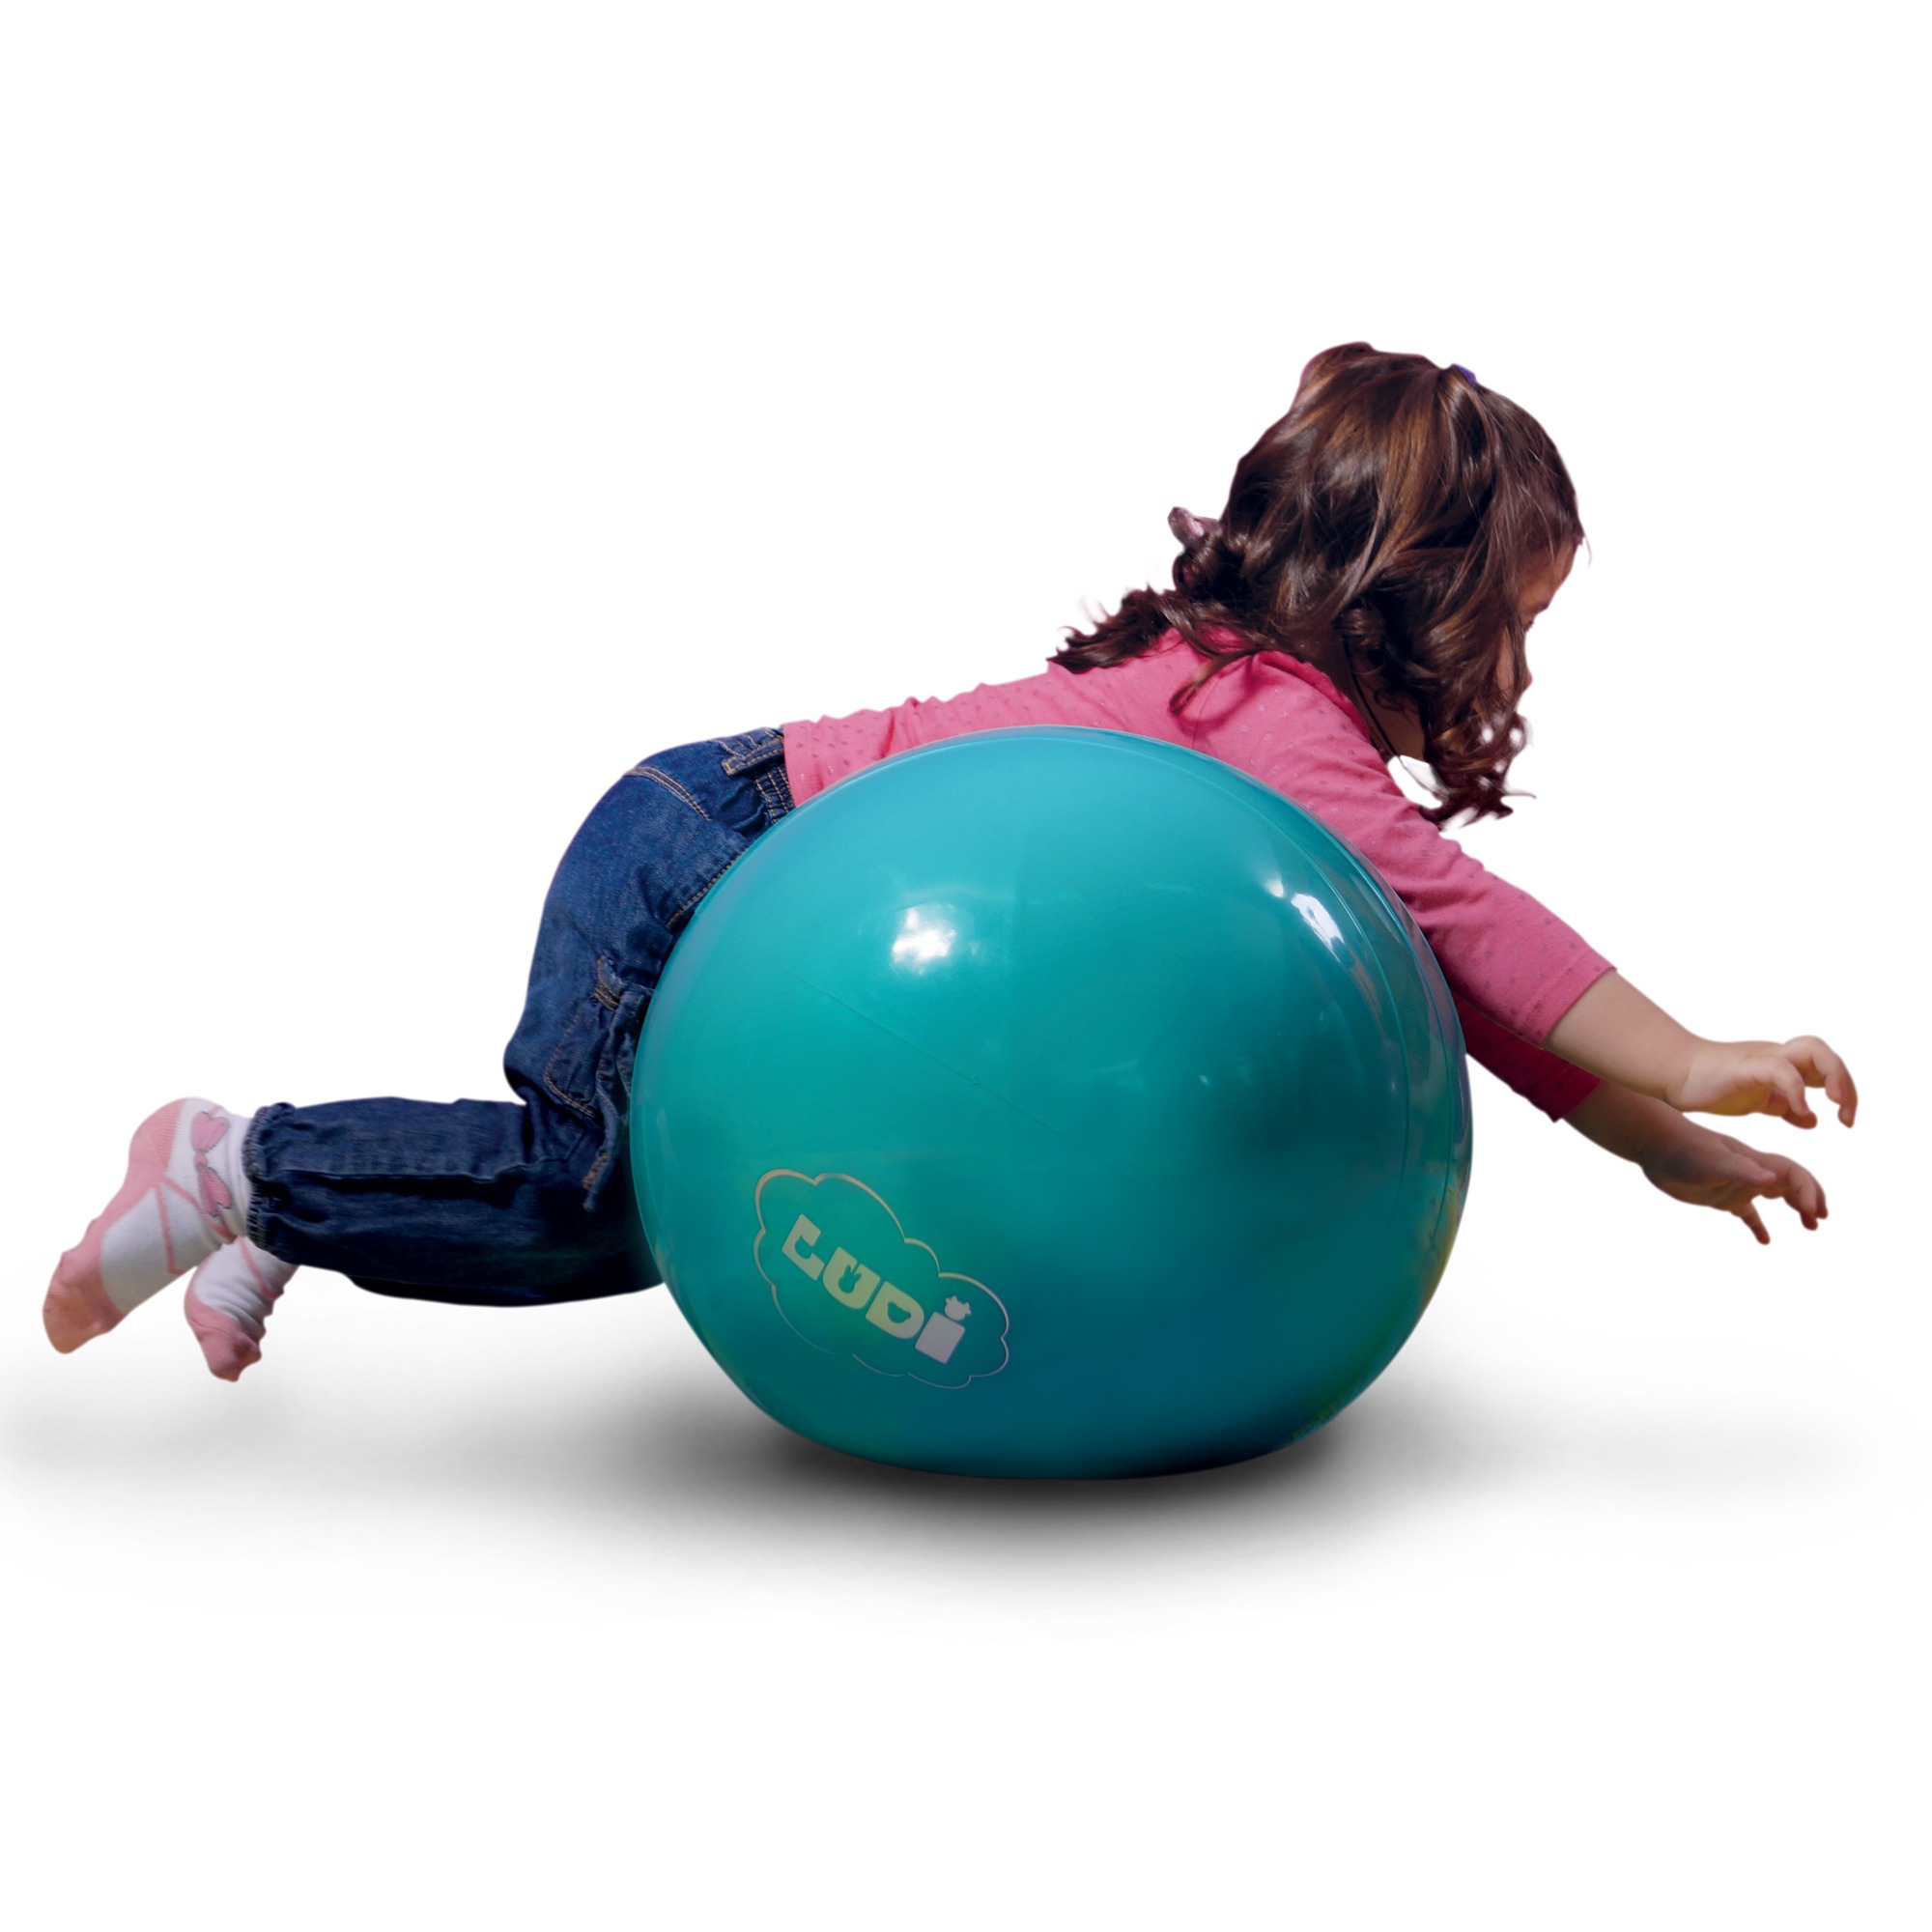 Oval exercise ball